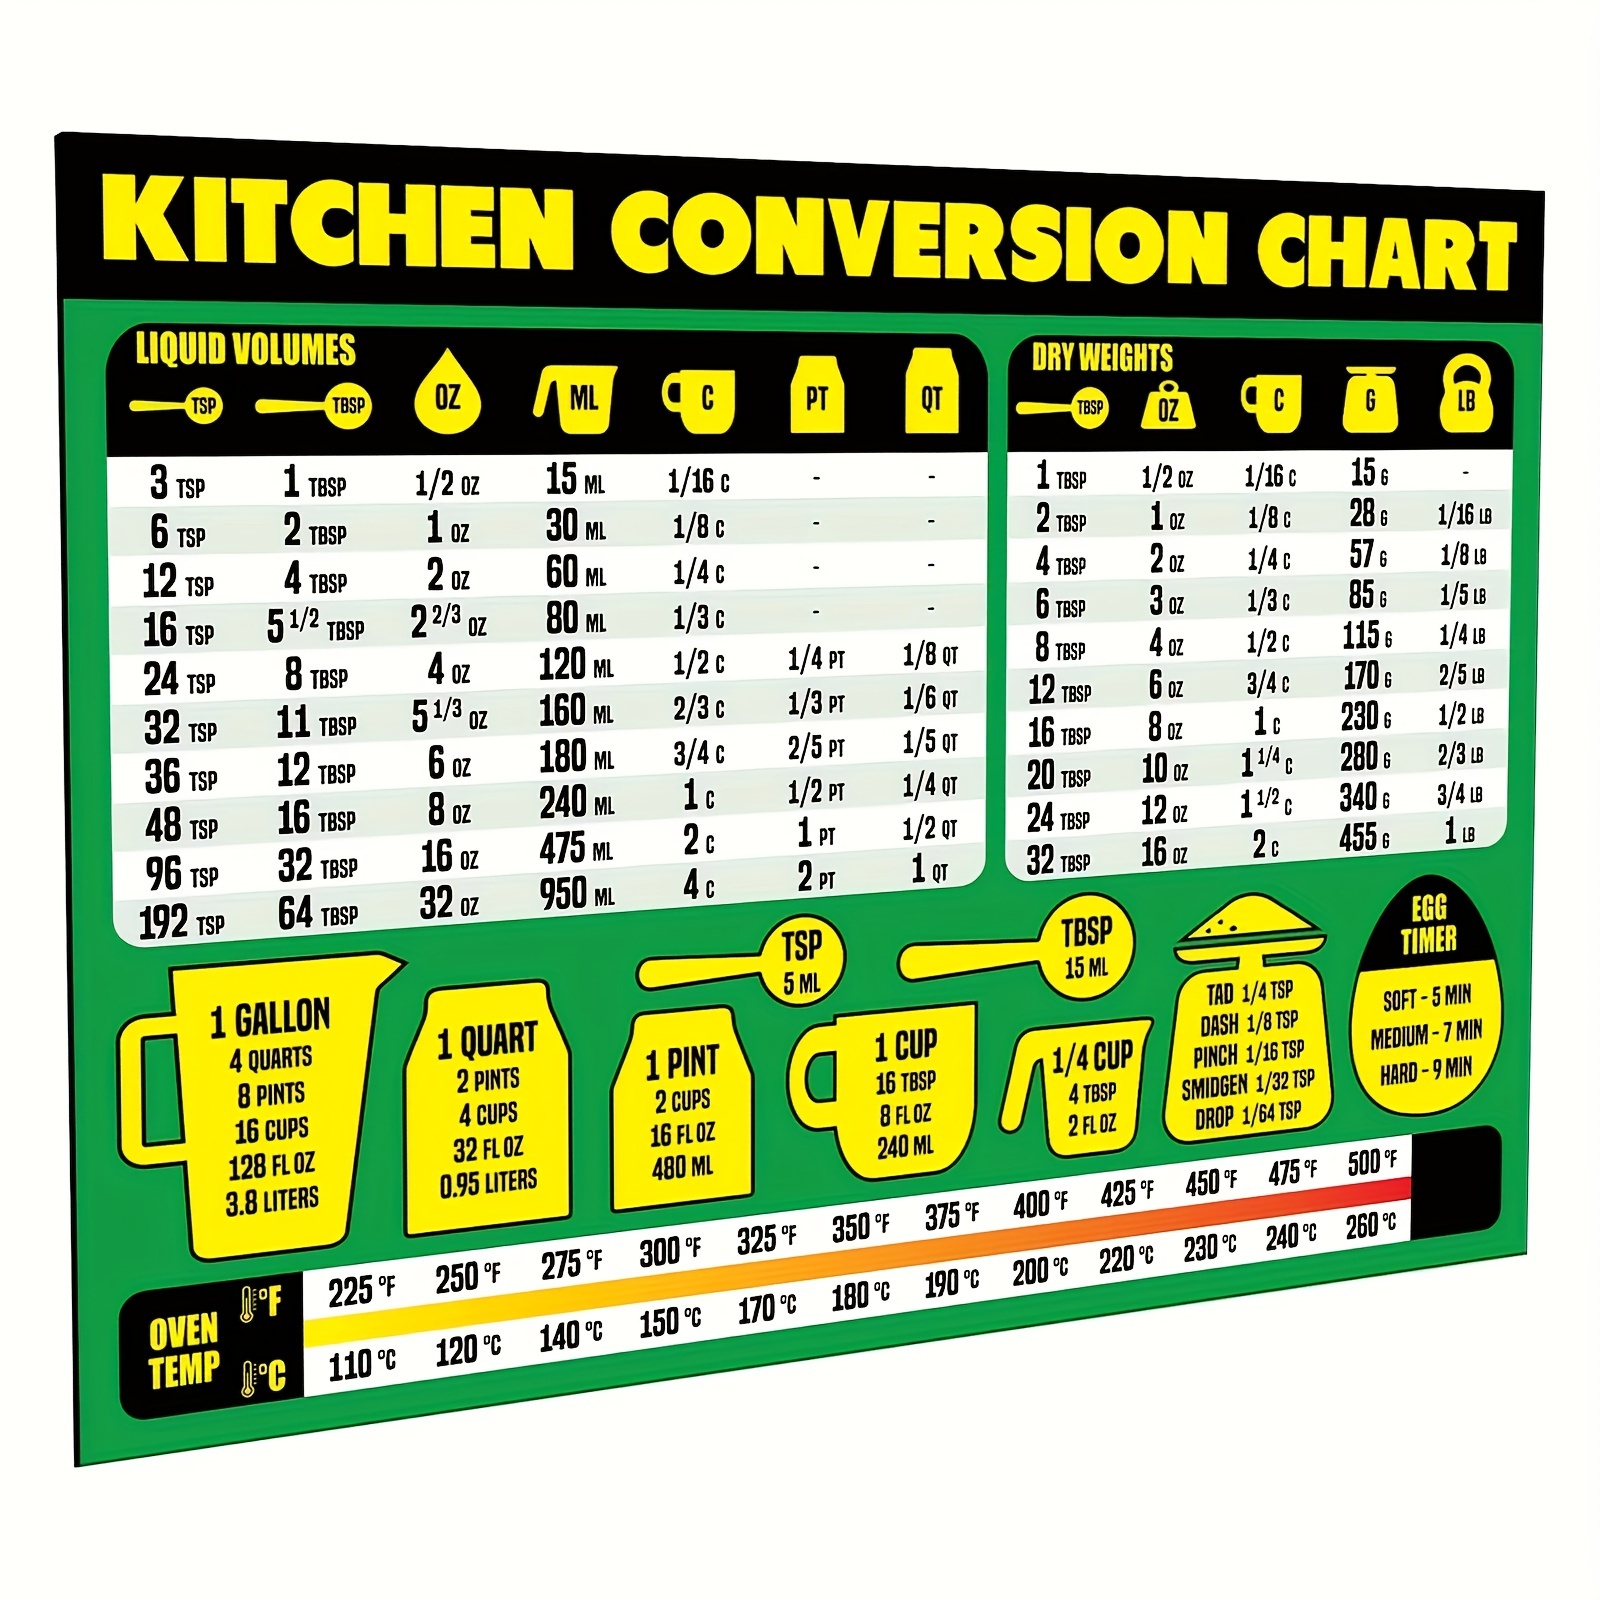 Baking Conversion Charts - Oven Temperatures and Measuring Cups